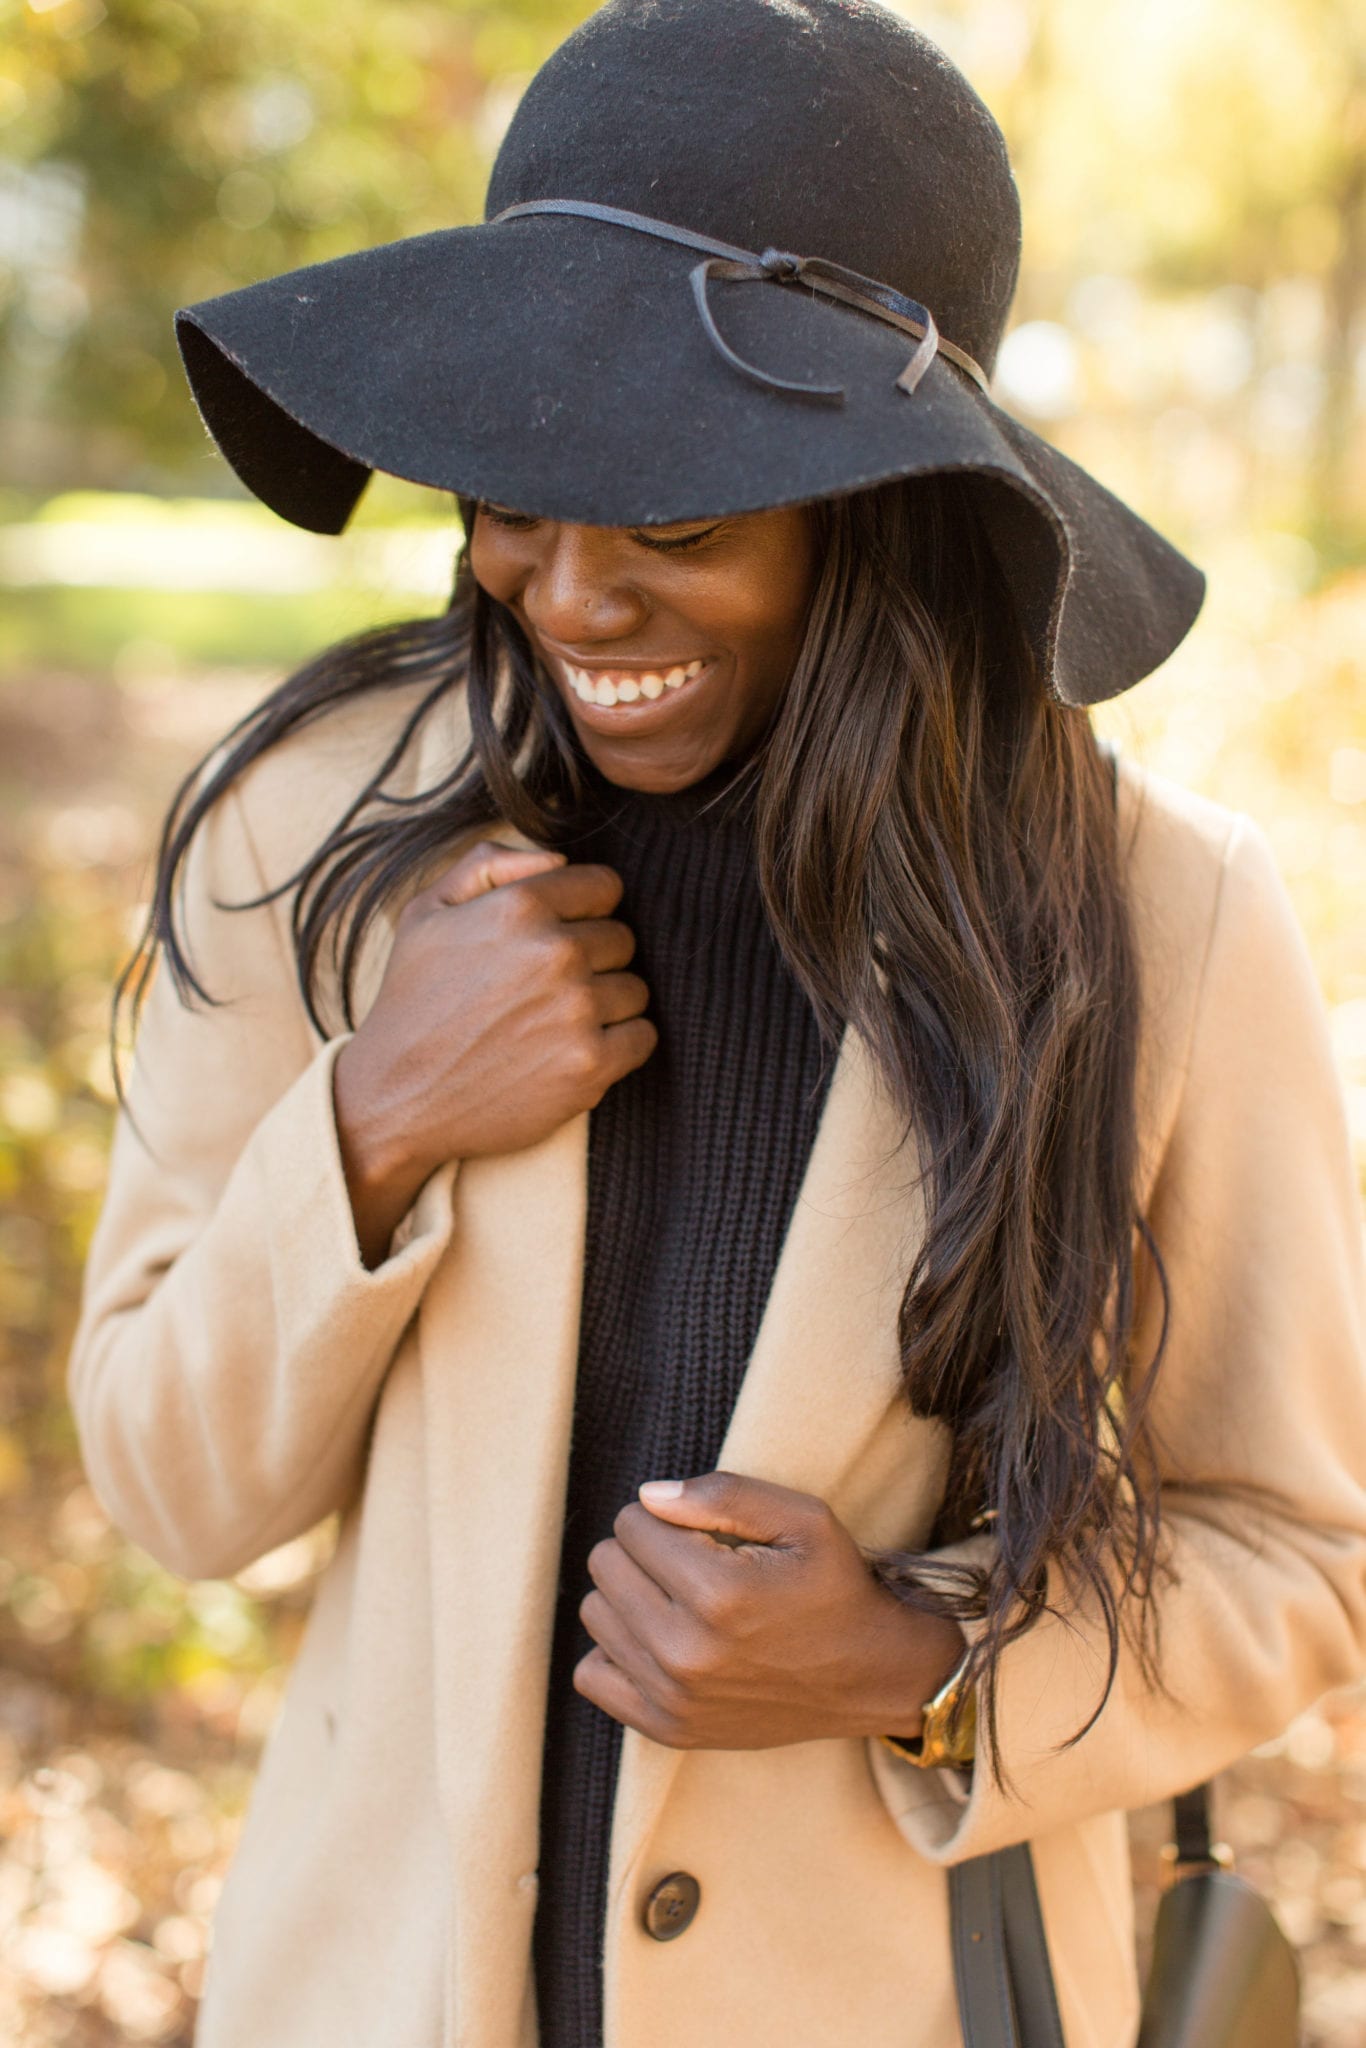 There's nothing more stylish about a fall/winter wardrobe than camel coats. The neutral palette makes it the best for matching all of your #ootds this season. Of course, I enjoy a nice pop of color, but I enjoy the versatility that neutrals can bring. Check out my camel coat choices on the blog! | GoodTomiCha Southern Fashion + Lifestyle Blogger 